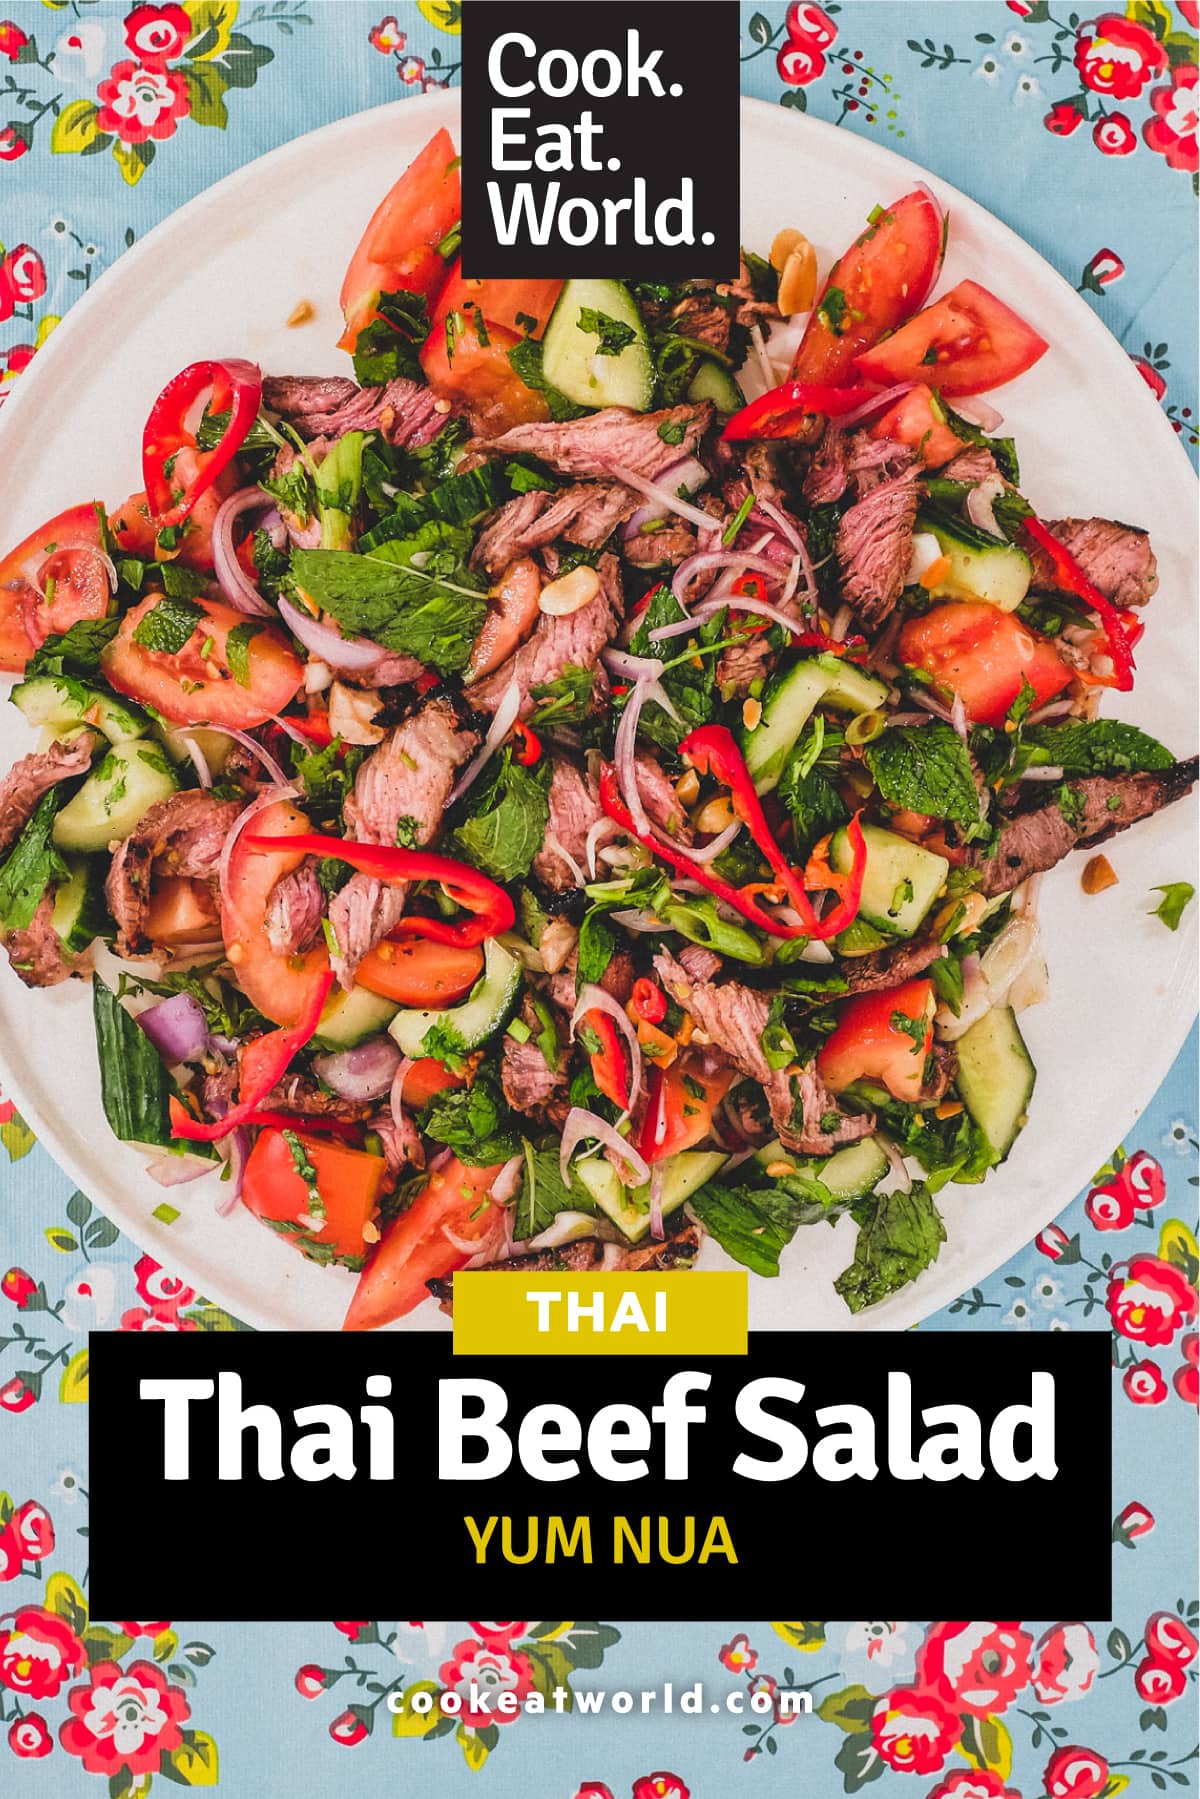 Thinly sliced ribeye steak is served in a salad of mint, cilantro shallots and spring onion in a spicy chilli dressing. Roasted peanuts are scattered over the salad. It sits non a bright blue floral plastic tablecloth like the ones in Thai markets.